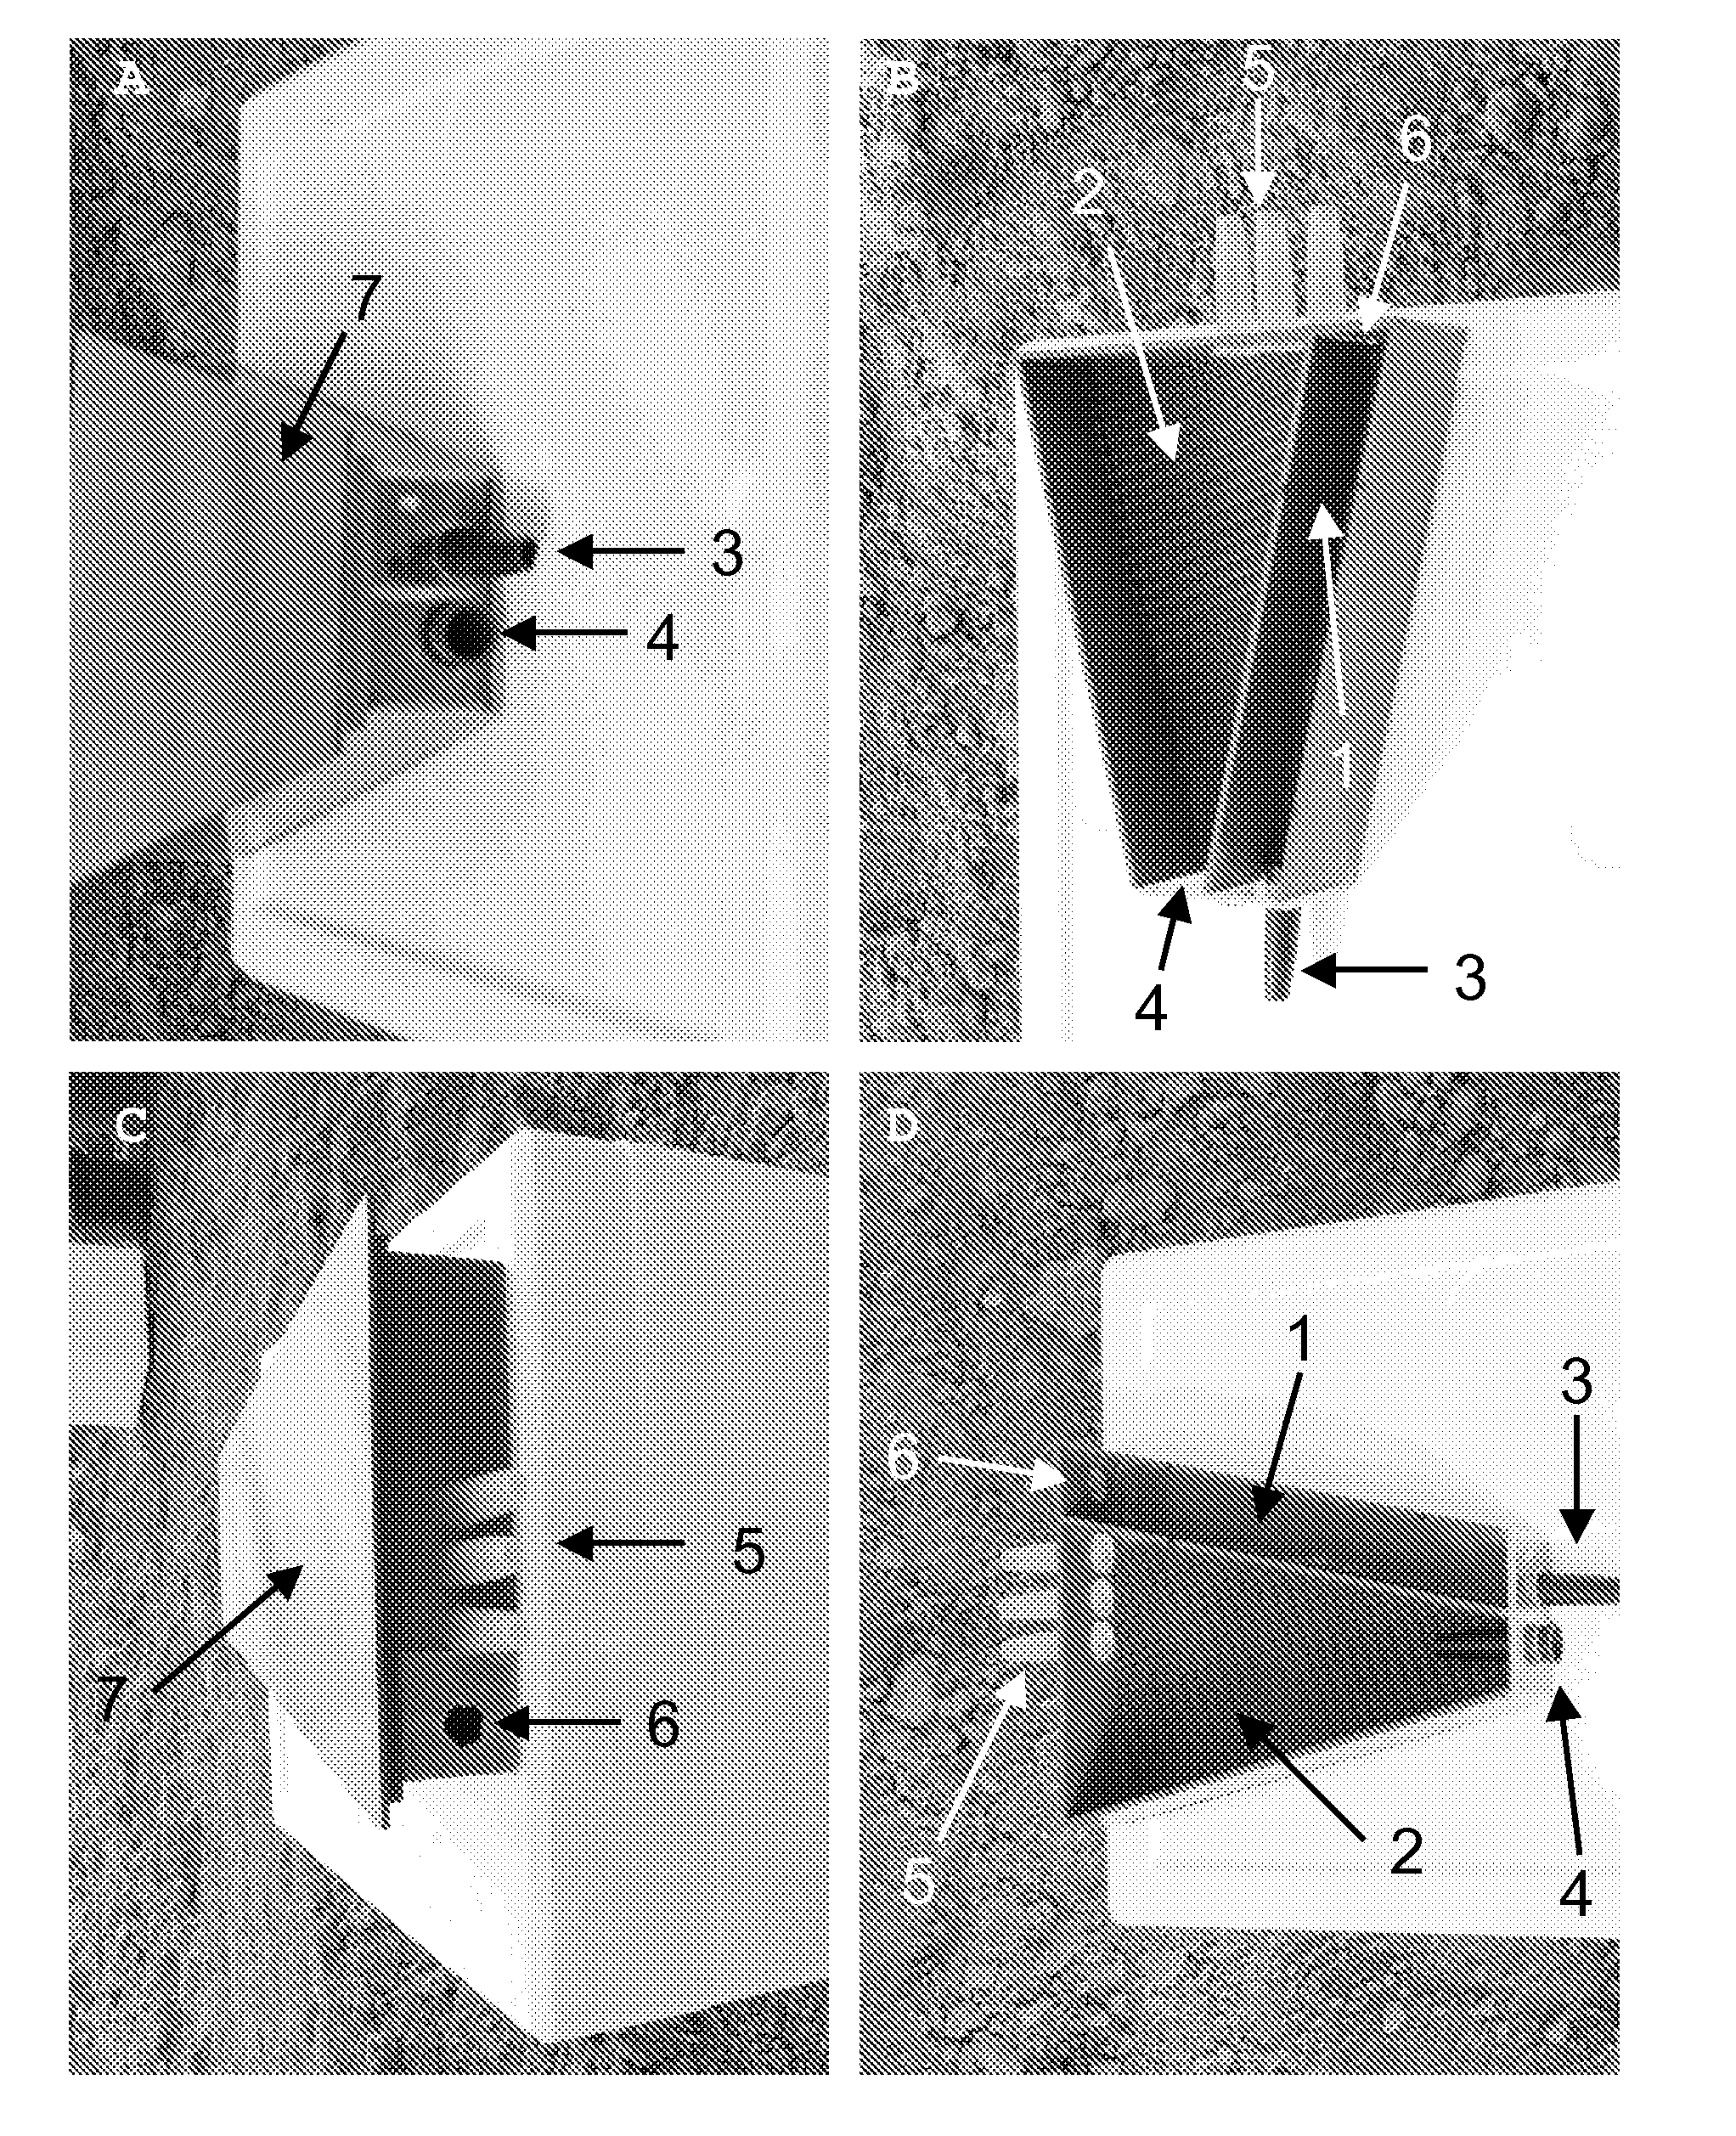 Hive-mounted disseminator device